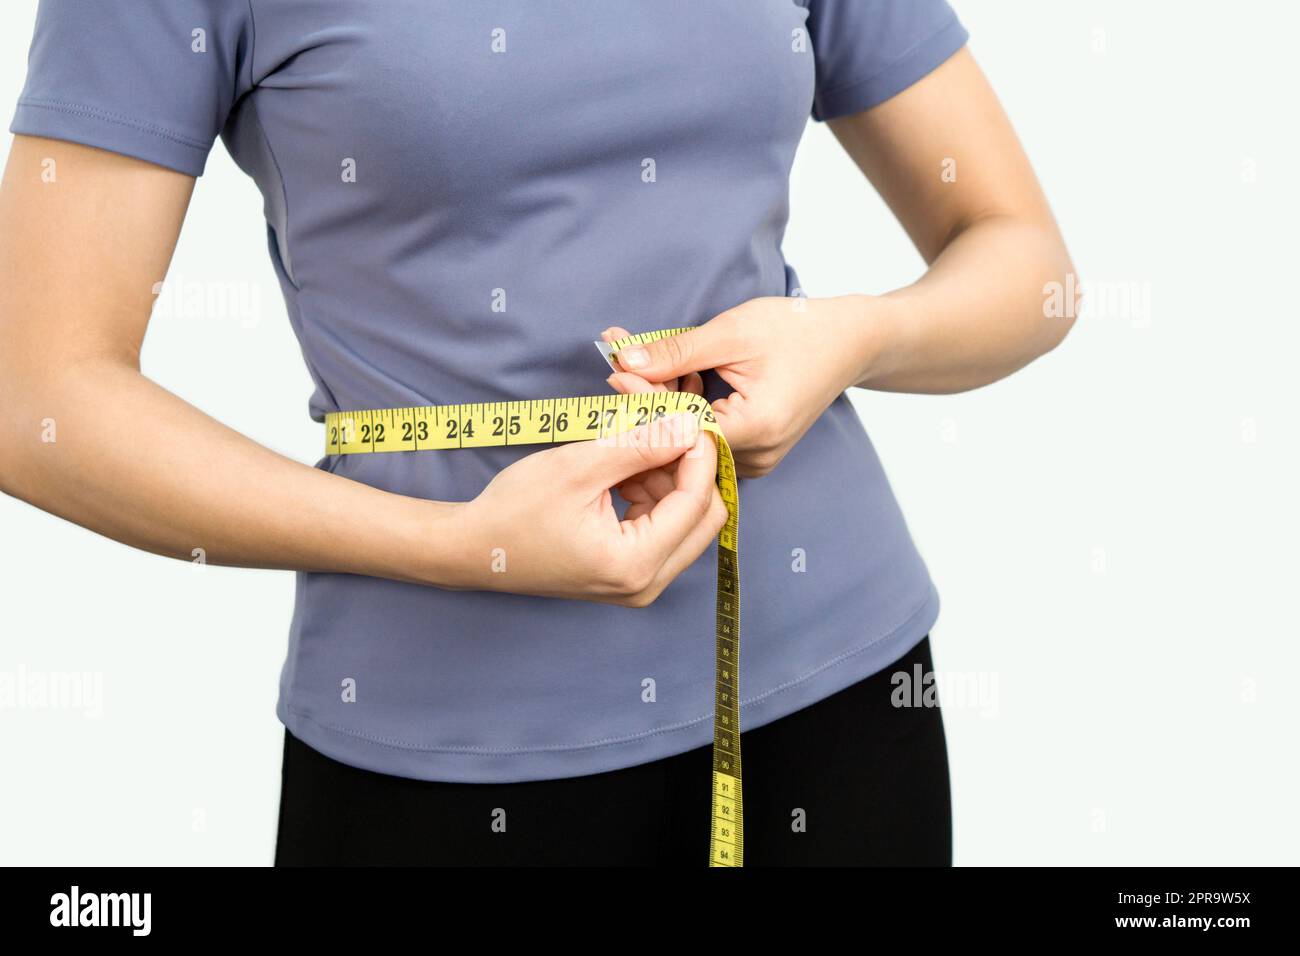 Closeup female hands in exercise clothes use a tape measure to measure around the waist. Healthy nutrition and weight losing concept. Portrait on white background with studio light. Stock Photo